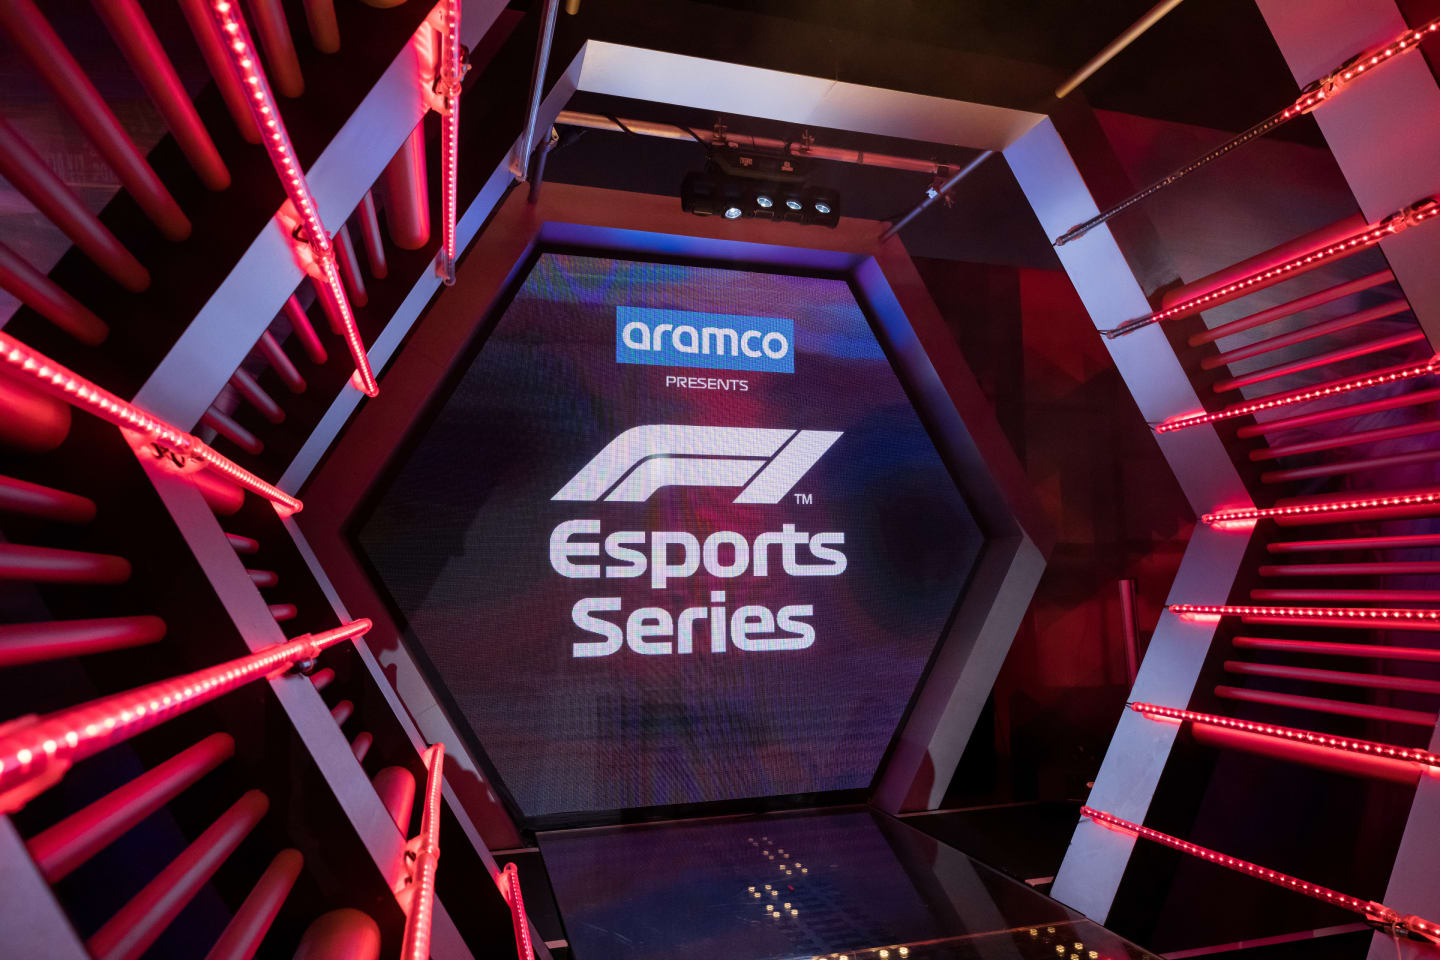 FULHAM, ENGLAND - OCTOBER 14: A detail view of the F1 Esports arena during round 1 of the F1